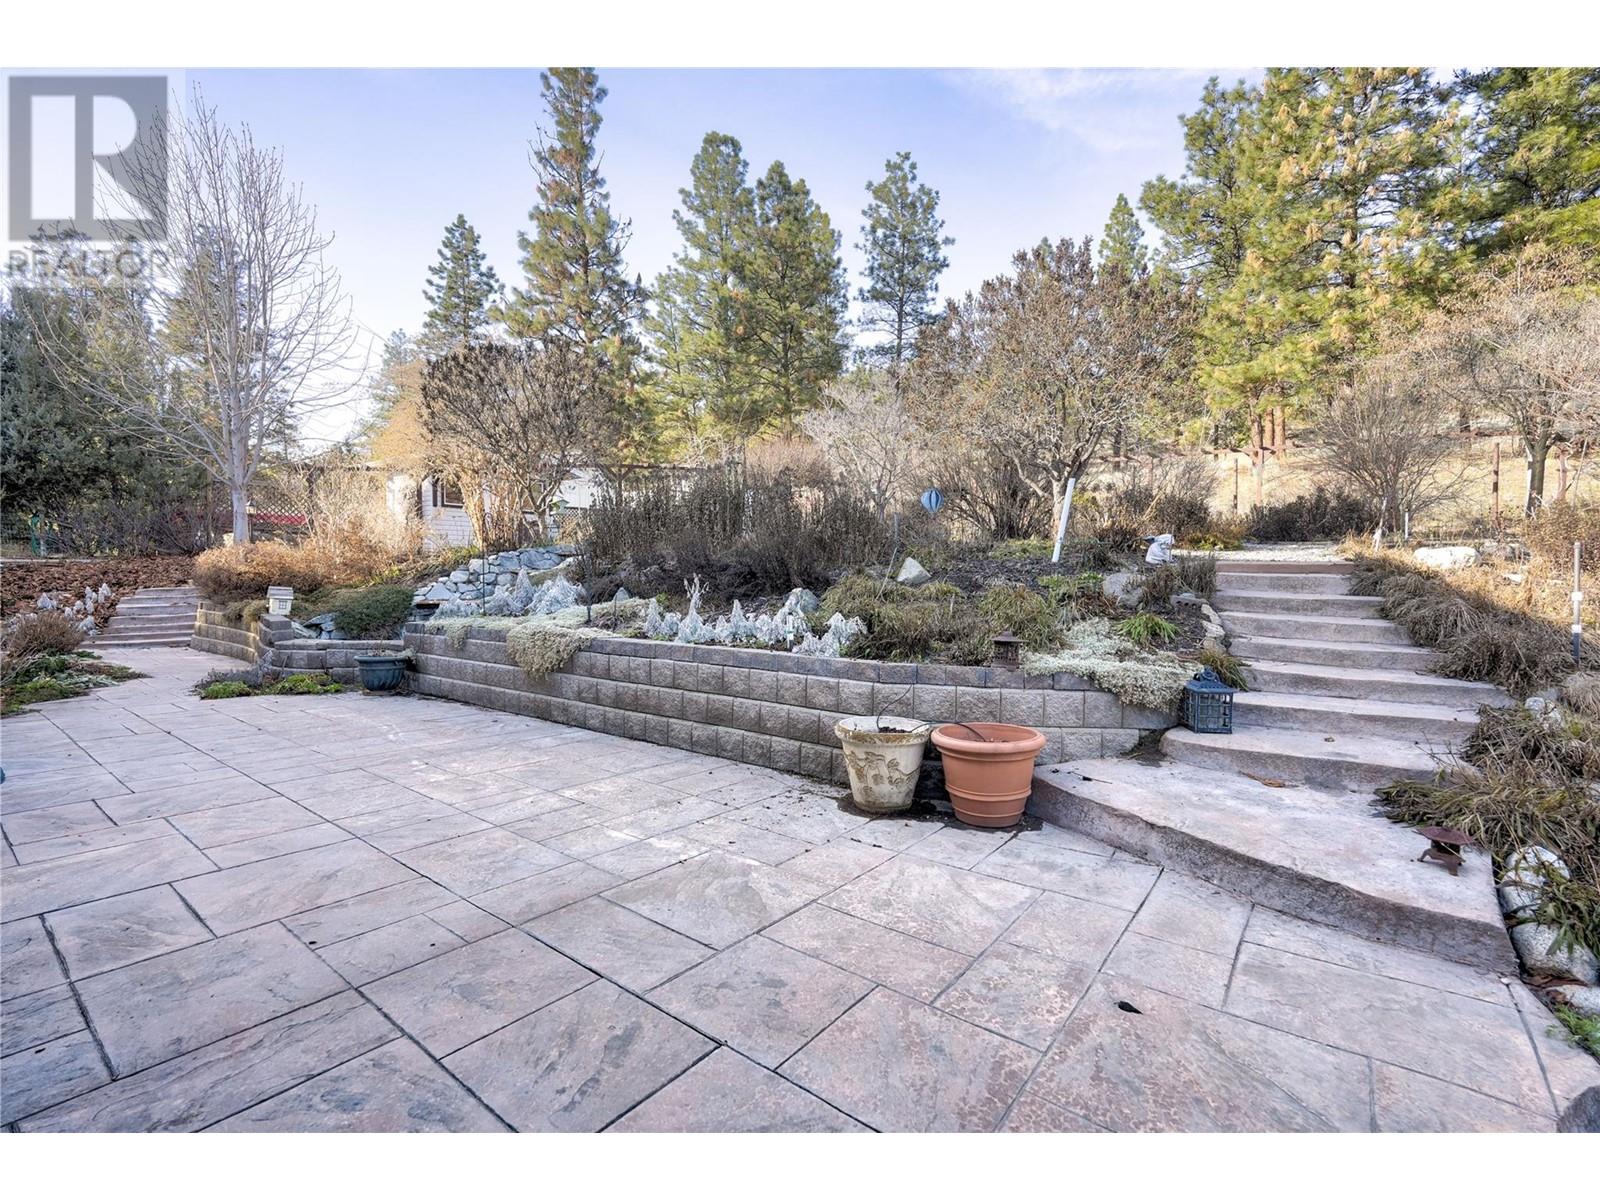  12808 Mclarty Place, Summerland